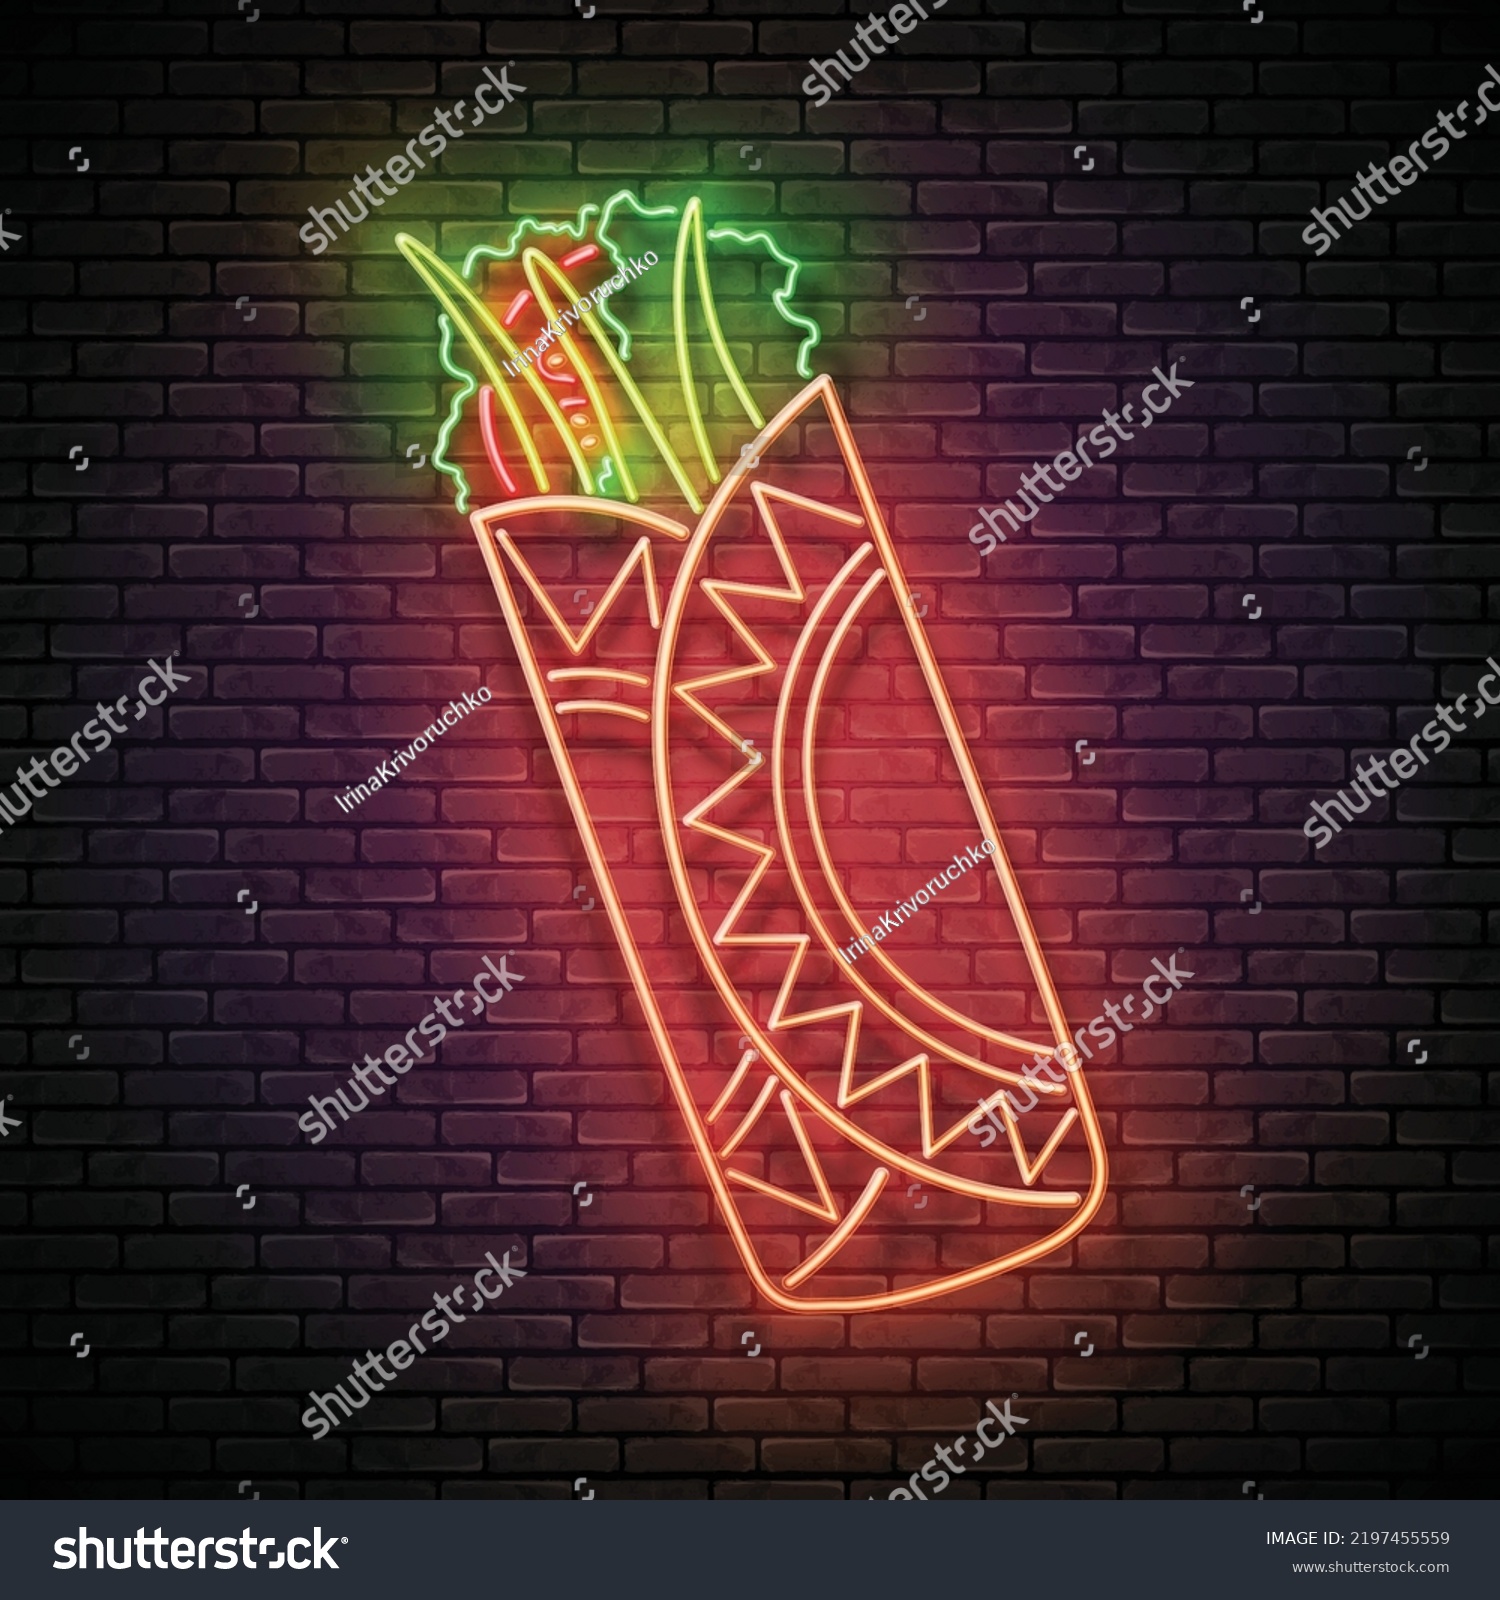 SVG of Glow Mexican chimichanga. Traditional ethnic food, appetizer. Neon Light Poster, Flyer, Banner, Signboard. Brick Wall. Vector 3d Illustration  svg